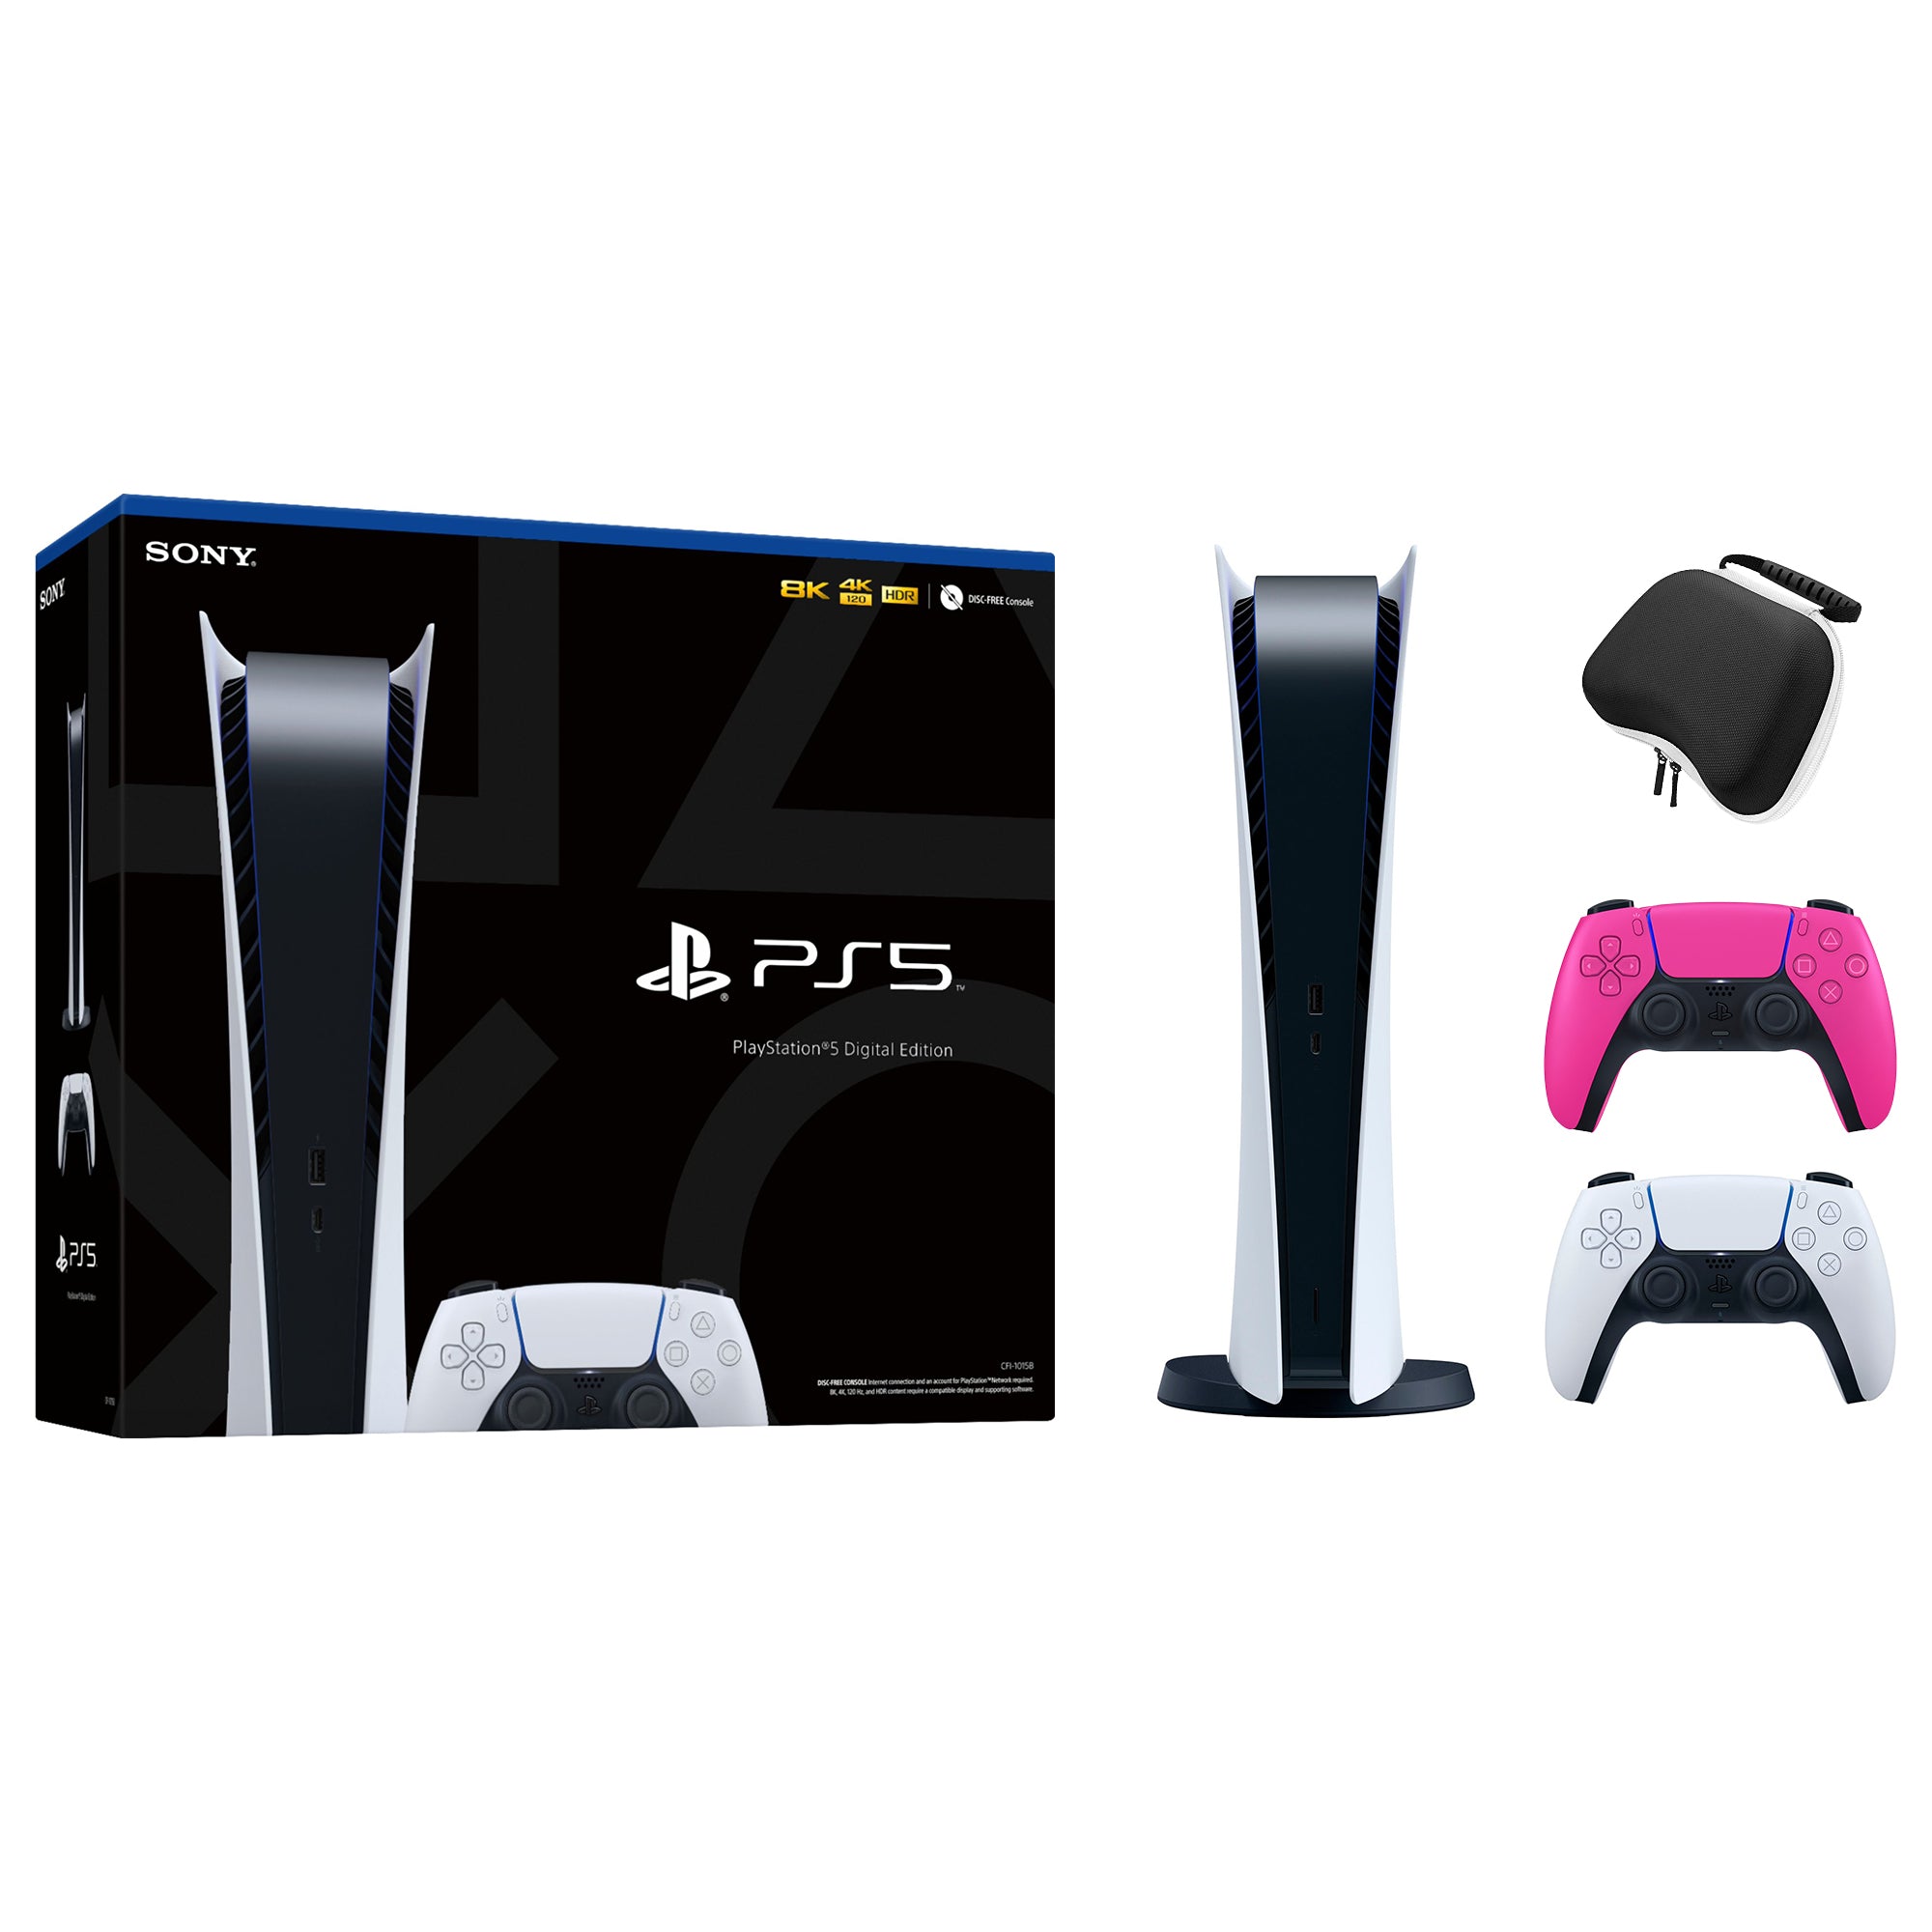 PlayStation 5 Digital Edition with Two Controllers White and Nova Pink DualSense and Mytrix Hard Shell Protective Controller Case - PS5 Gaming Console